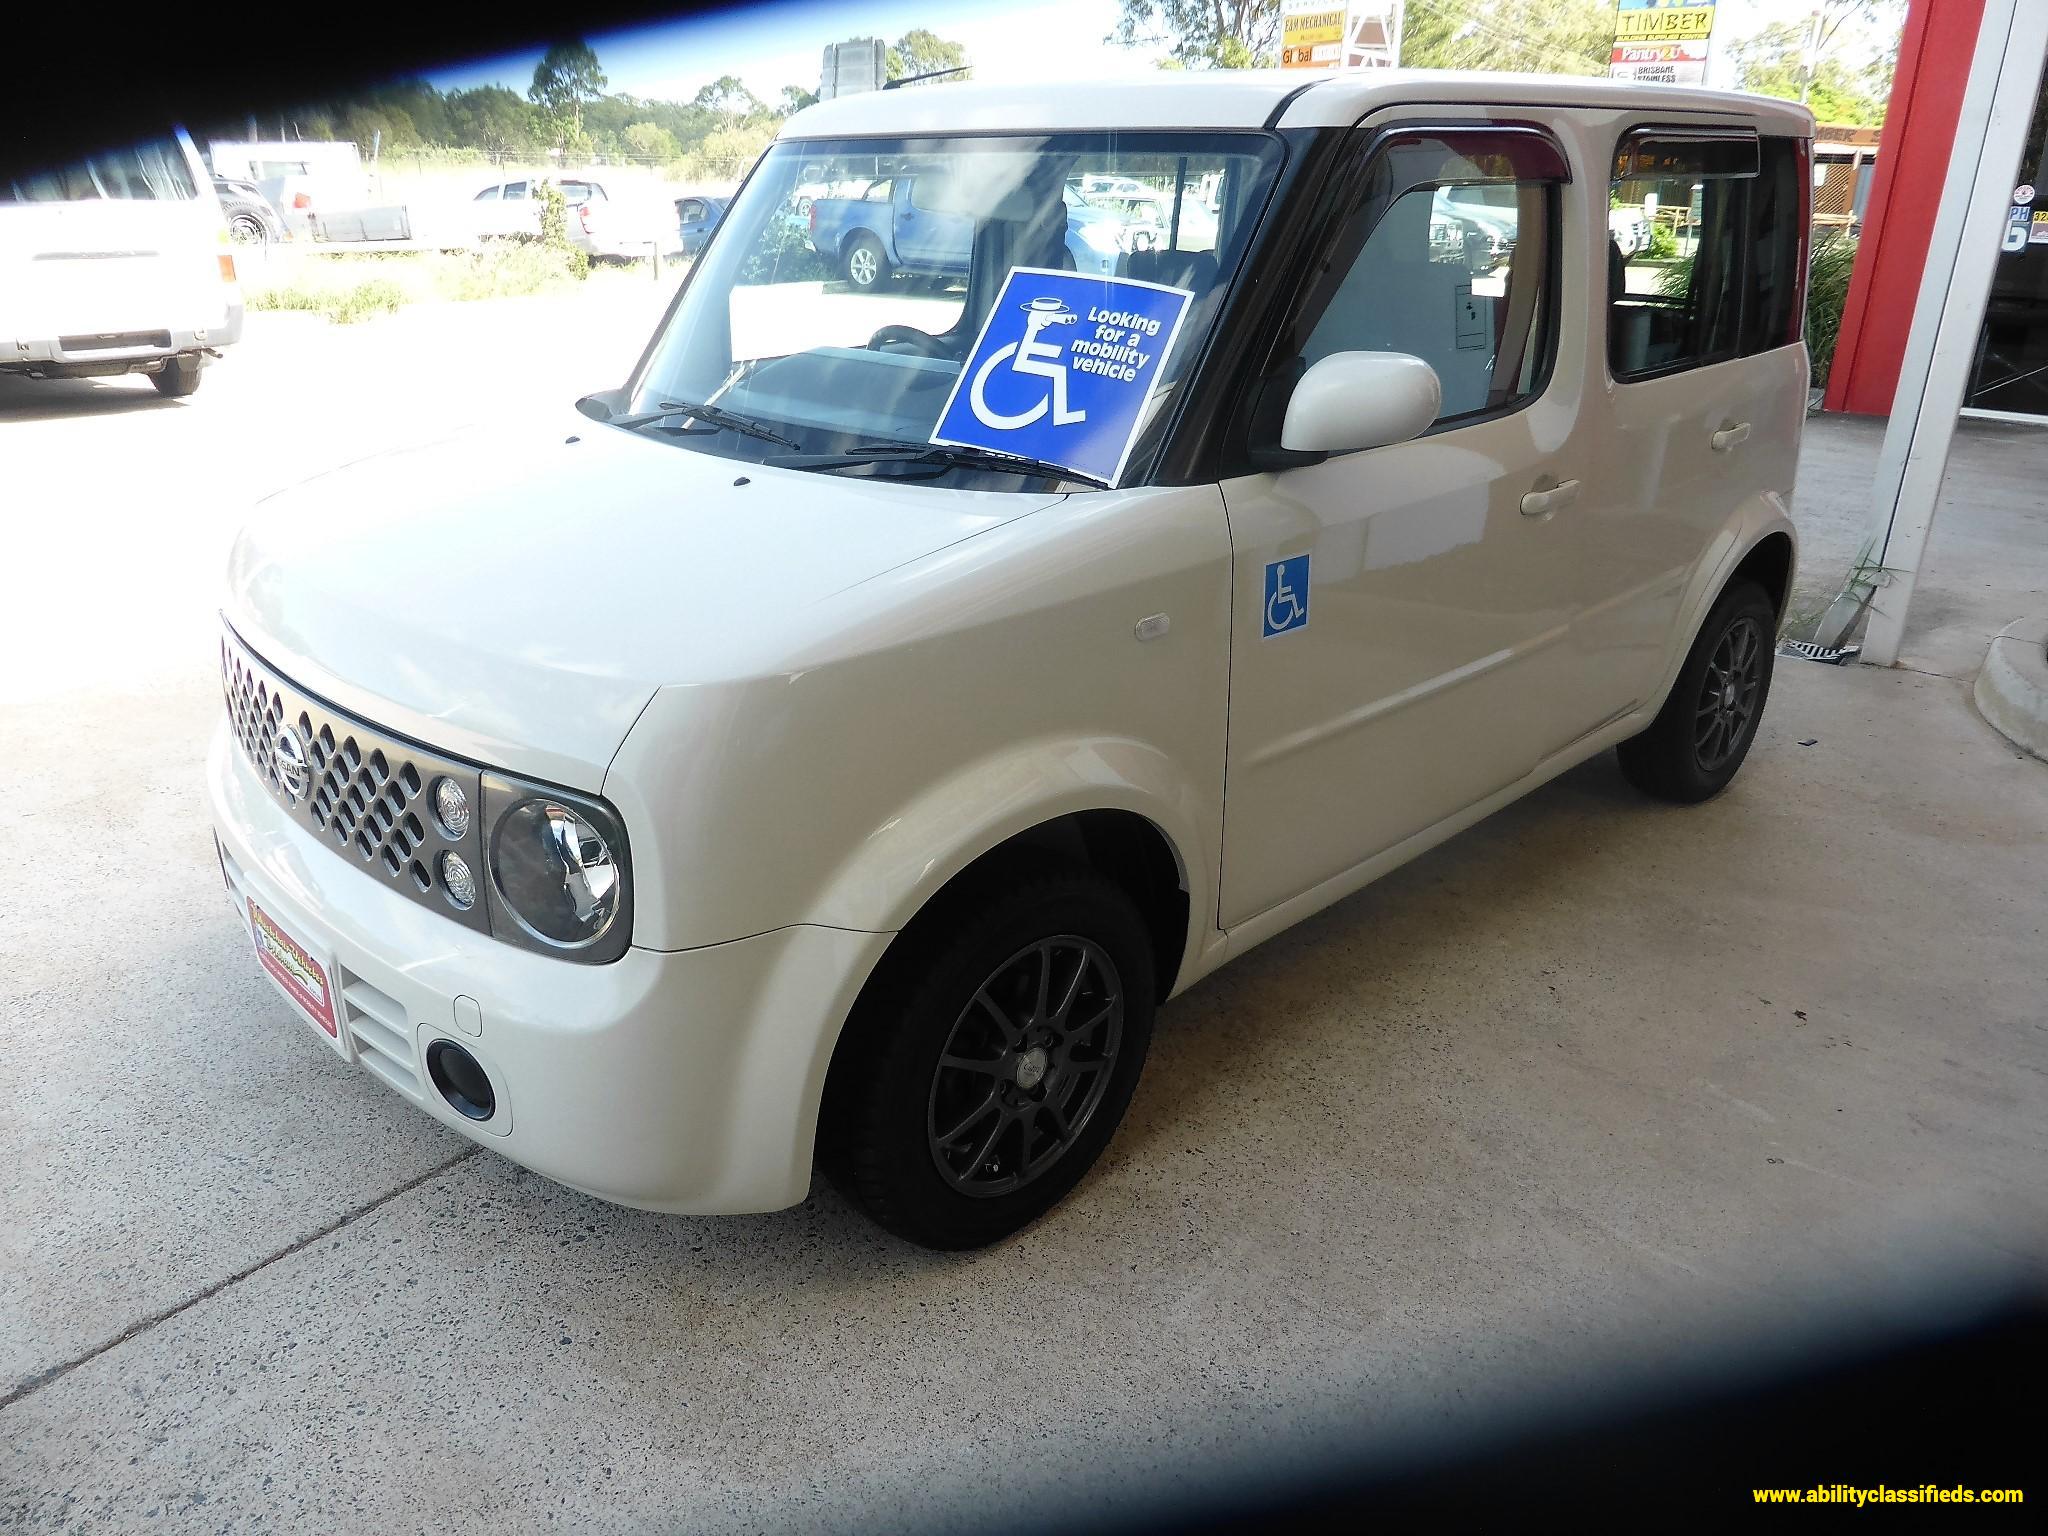 2005 Nissan Cube Rear Wheelchair or Scooter Entry